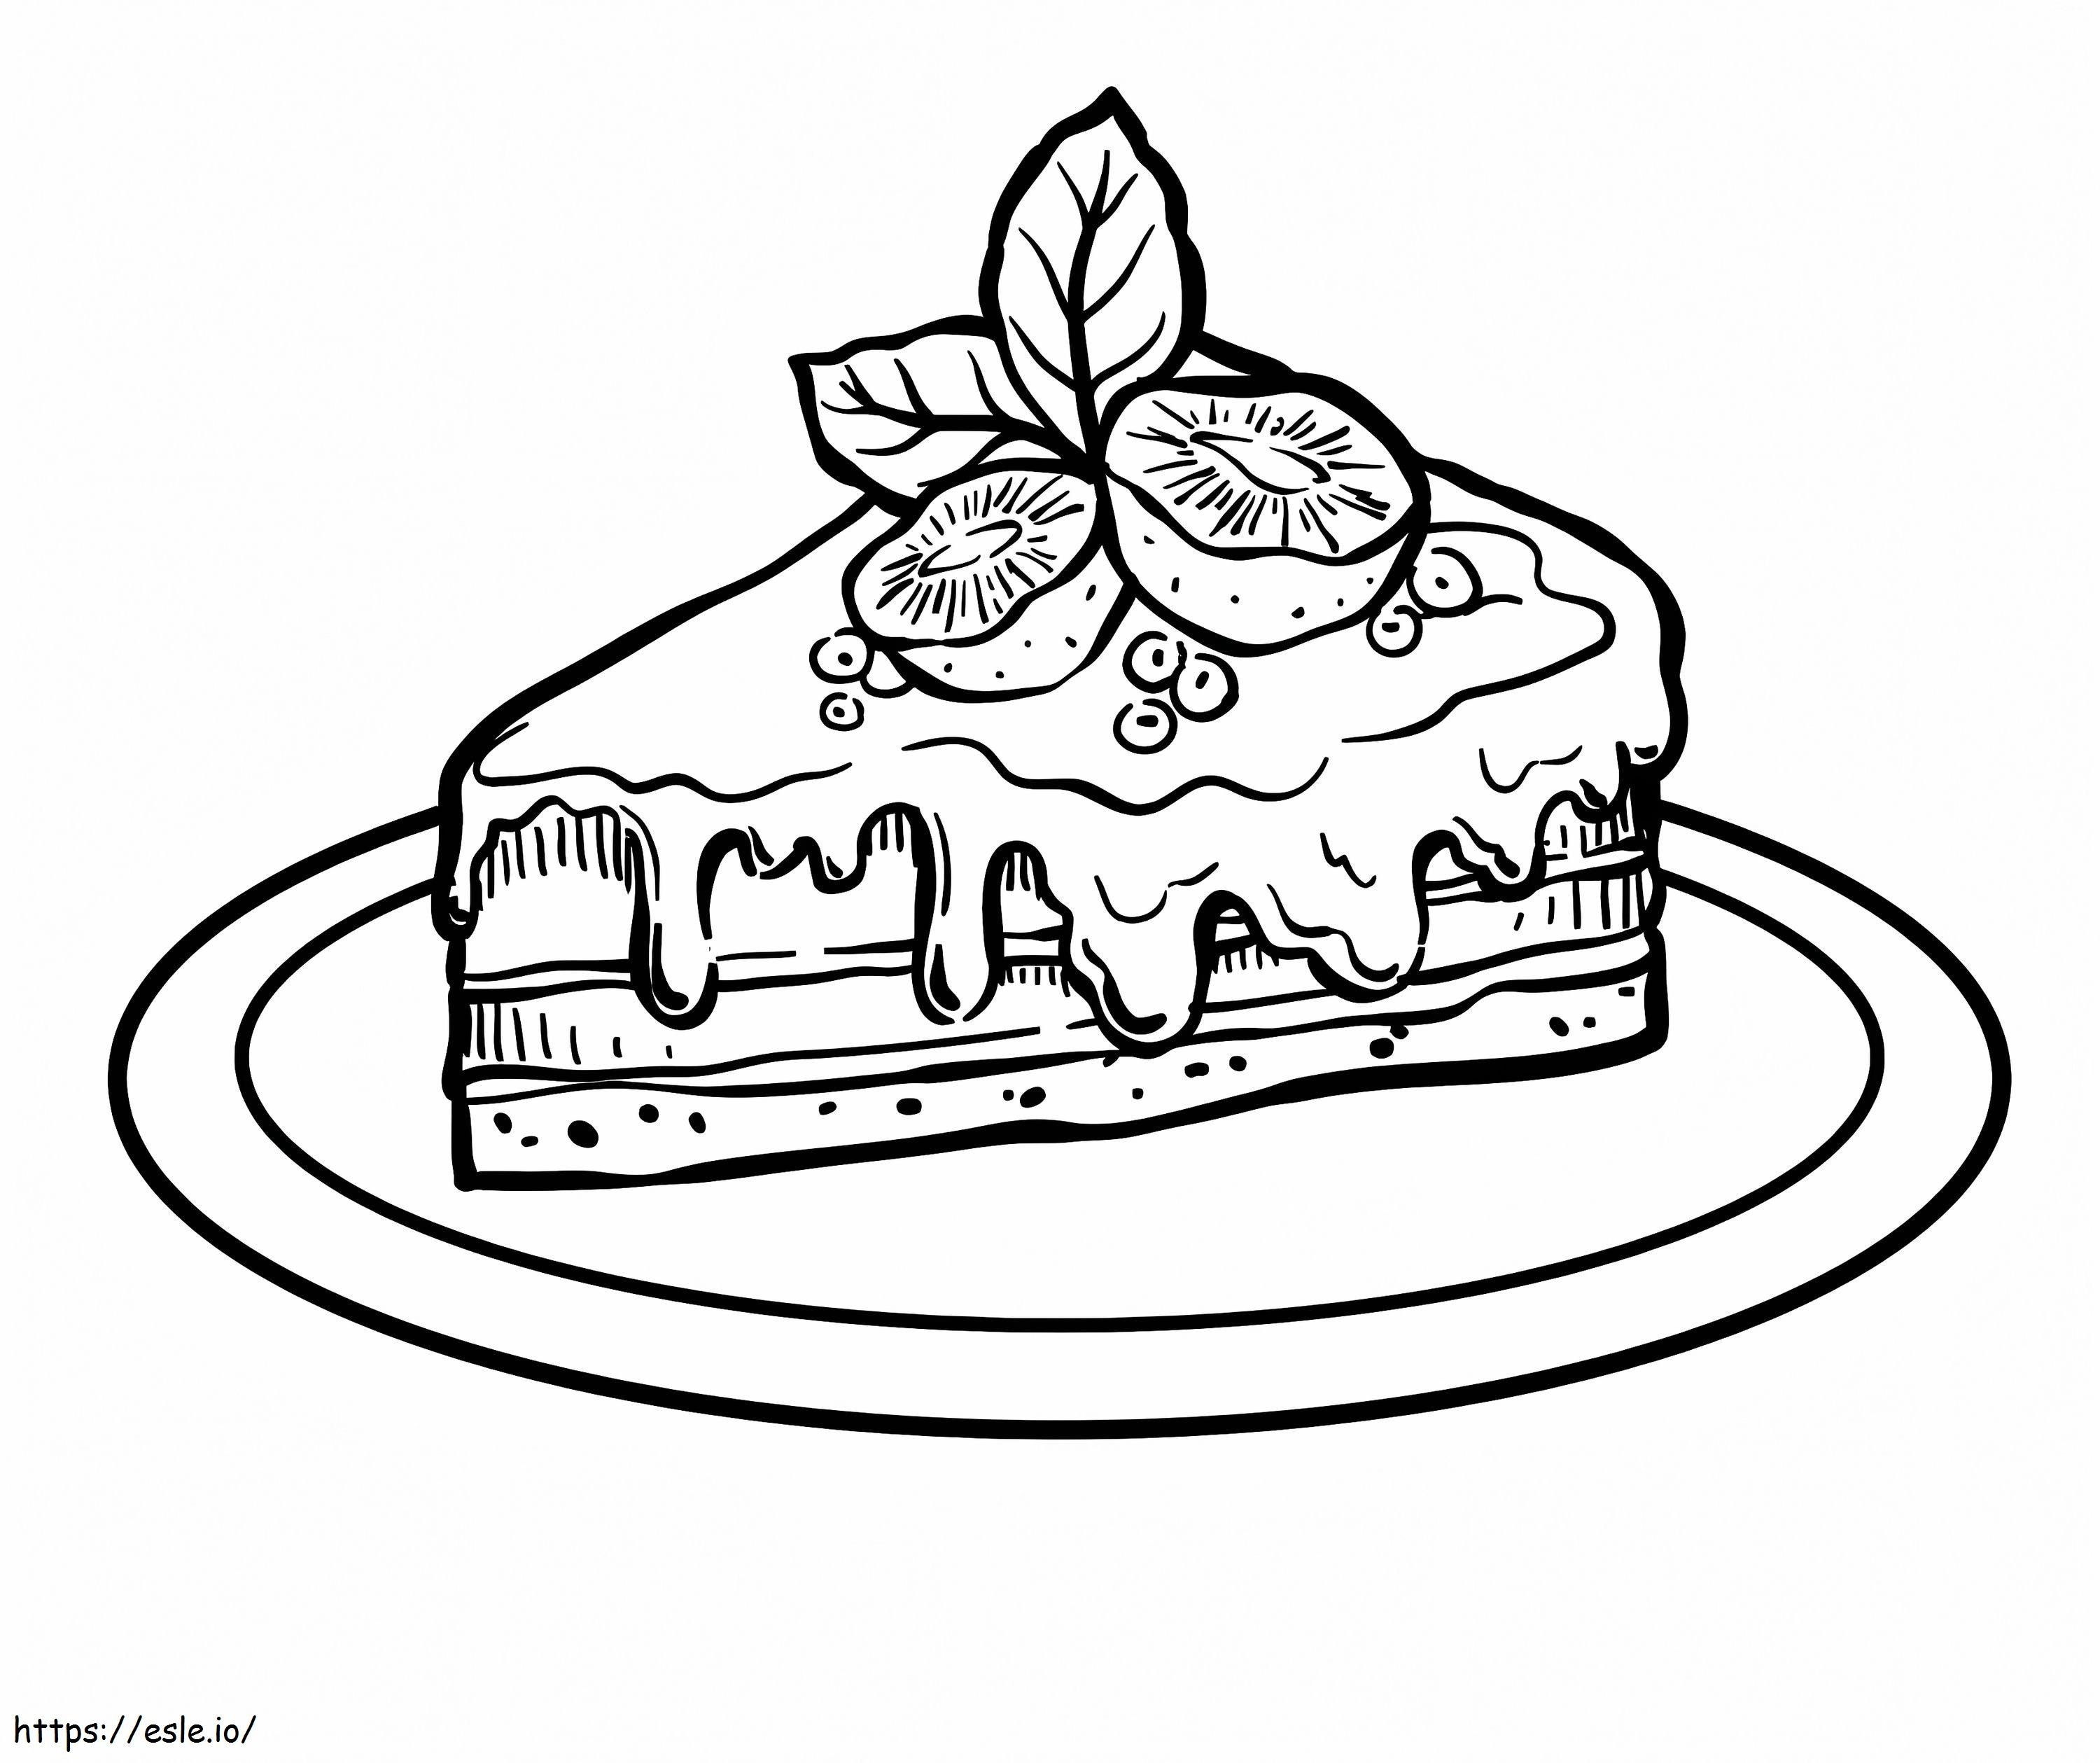 Delicious Piece Of Cake coloring page